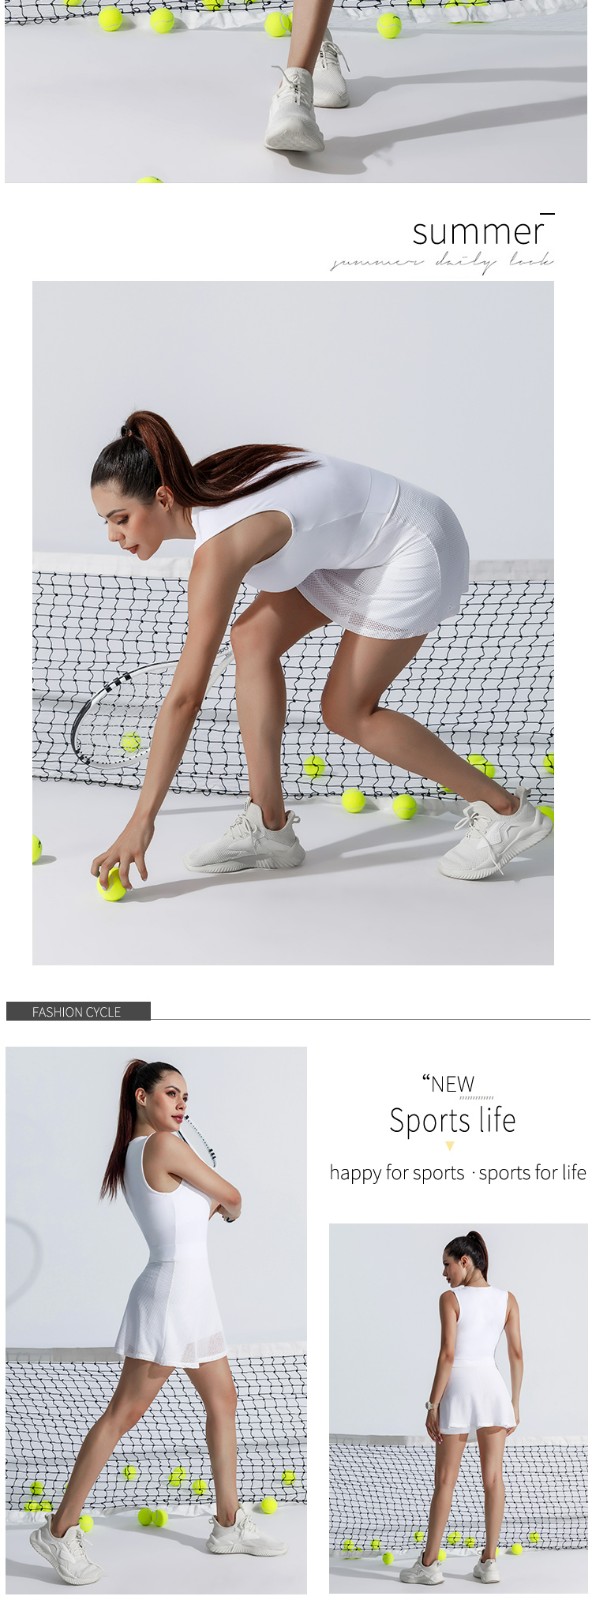 INGOR women's tennis outfits production for sport-5